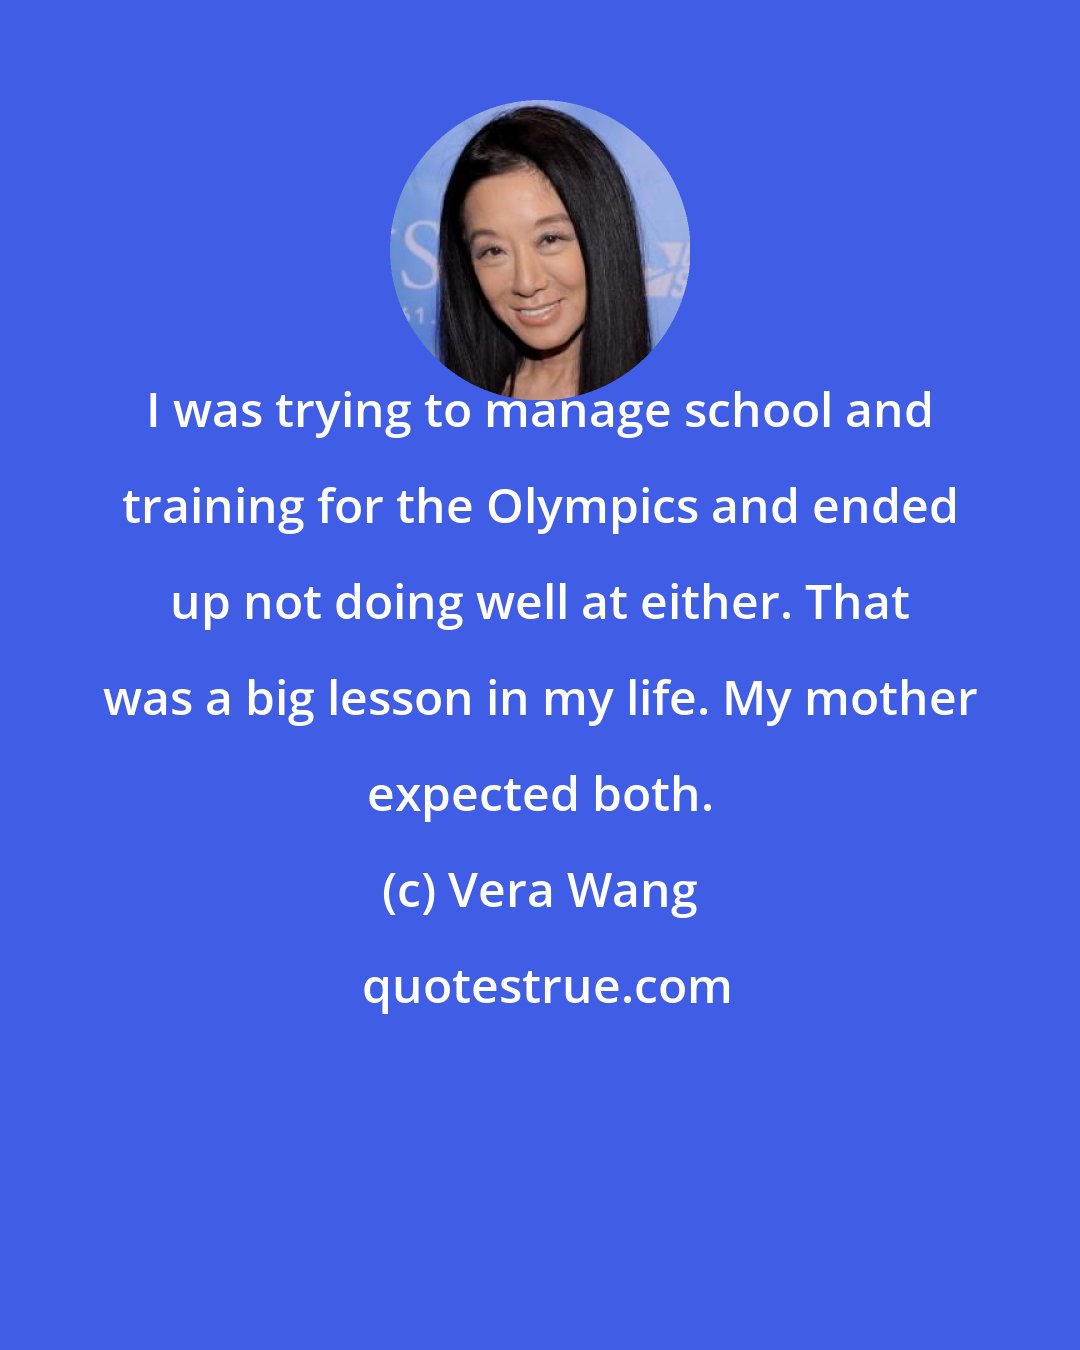 Vera Wang: I was trying to manage school and training for the Olympics and ended up not doing well at either. That was a big lesson in my life. My mother expected both.